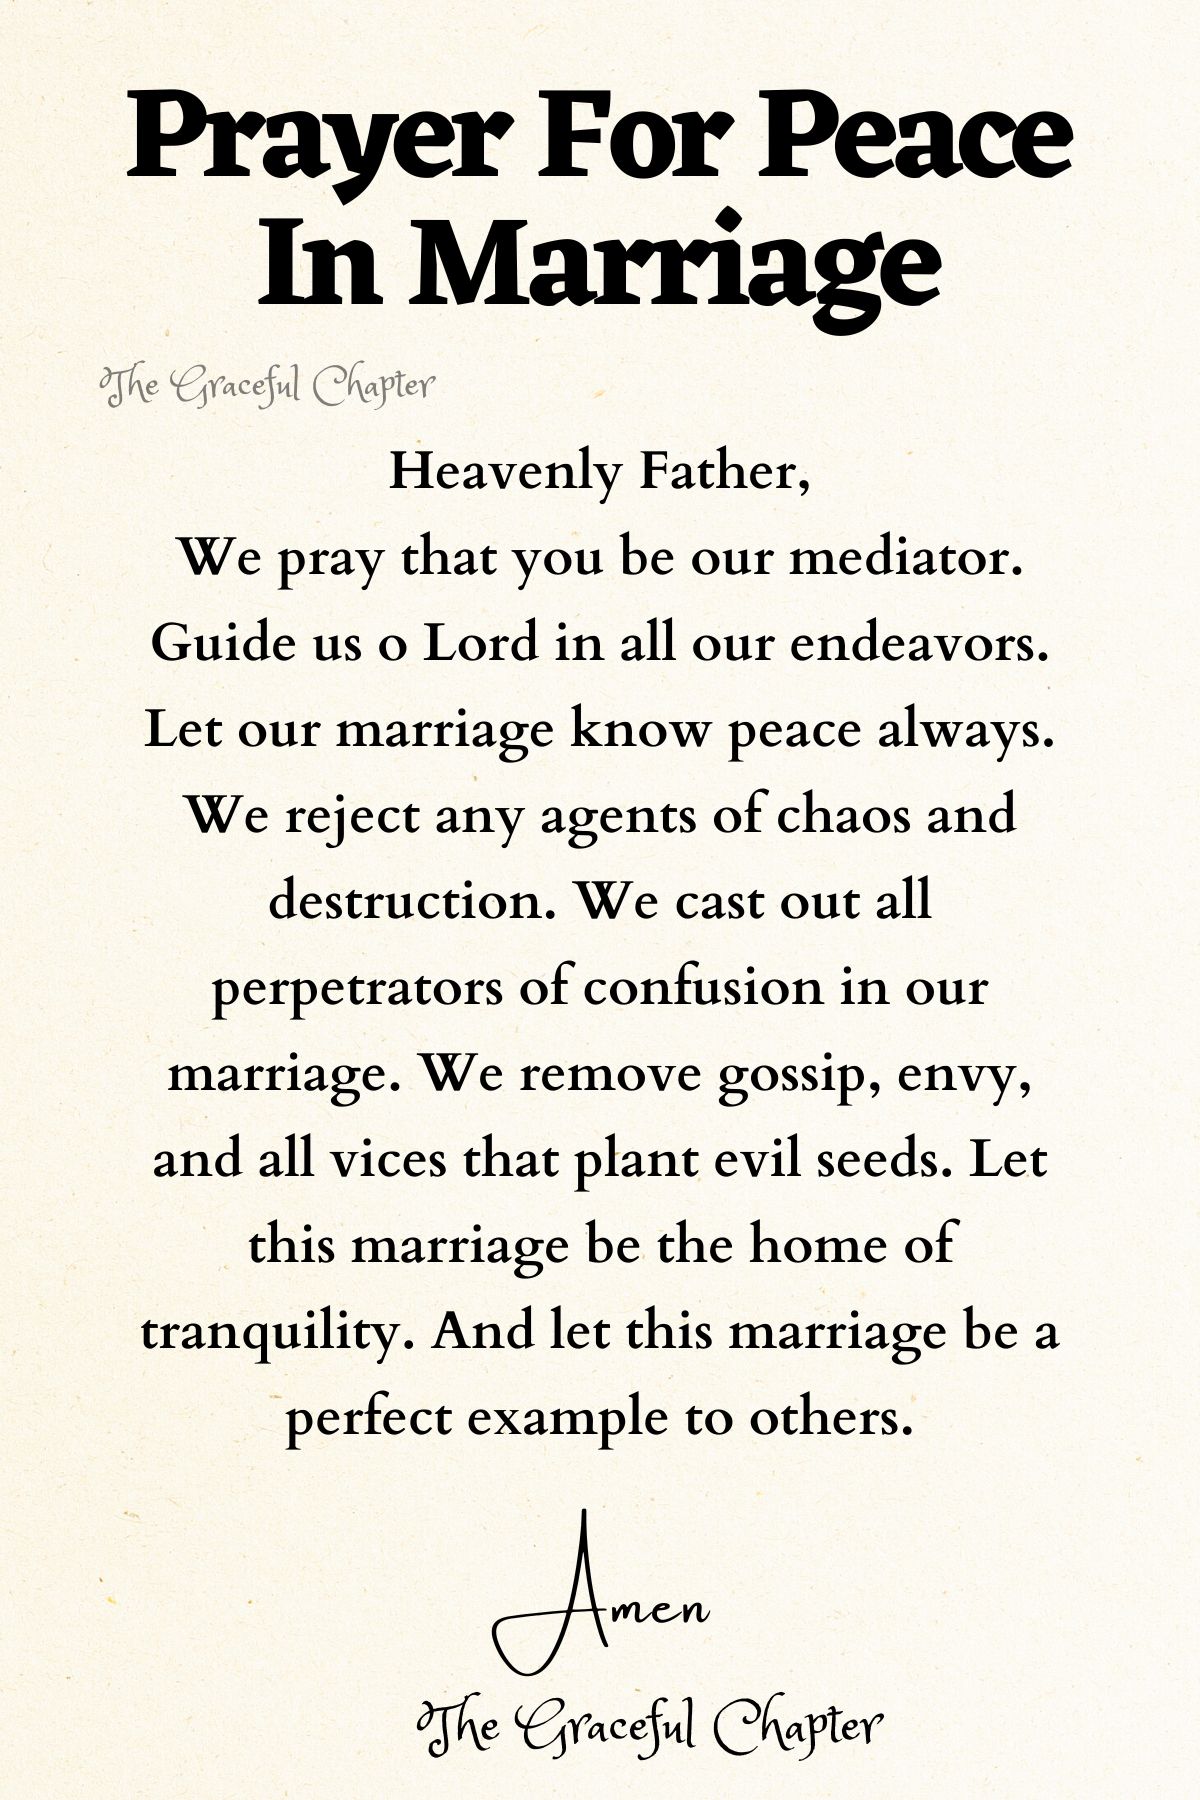 Prayer for peace in marriage